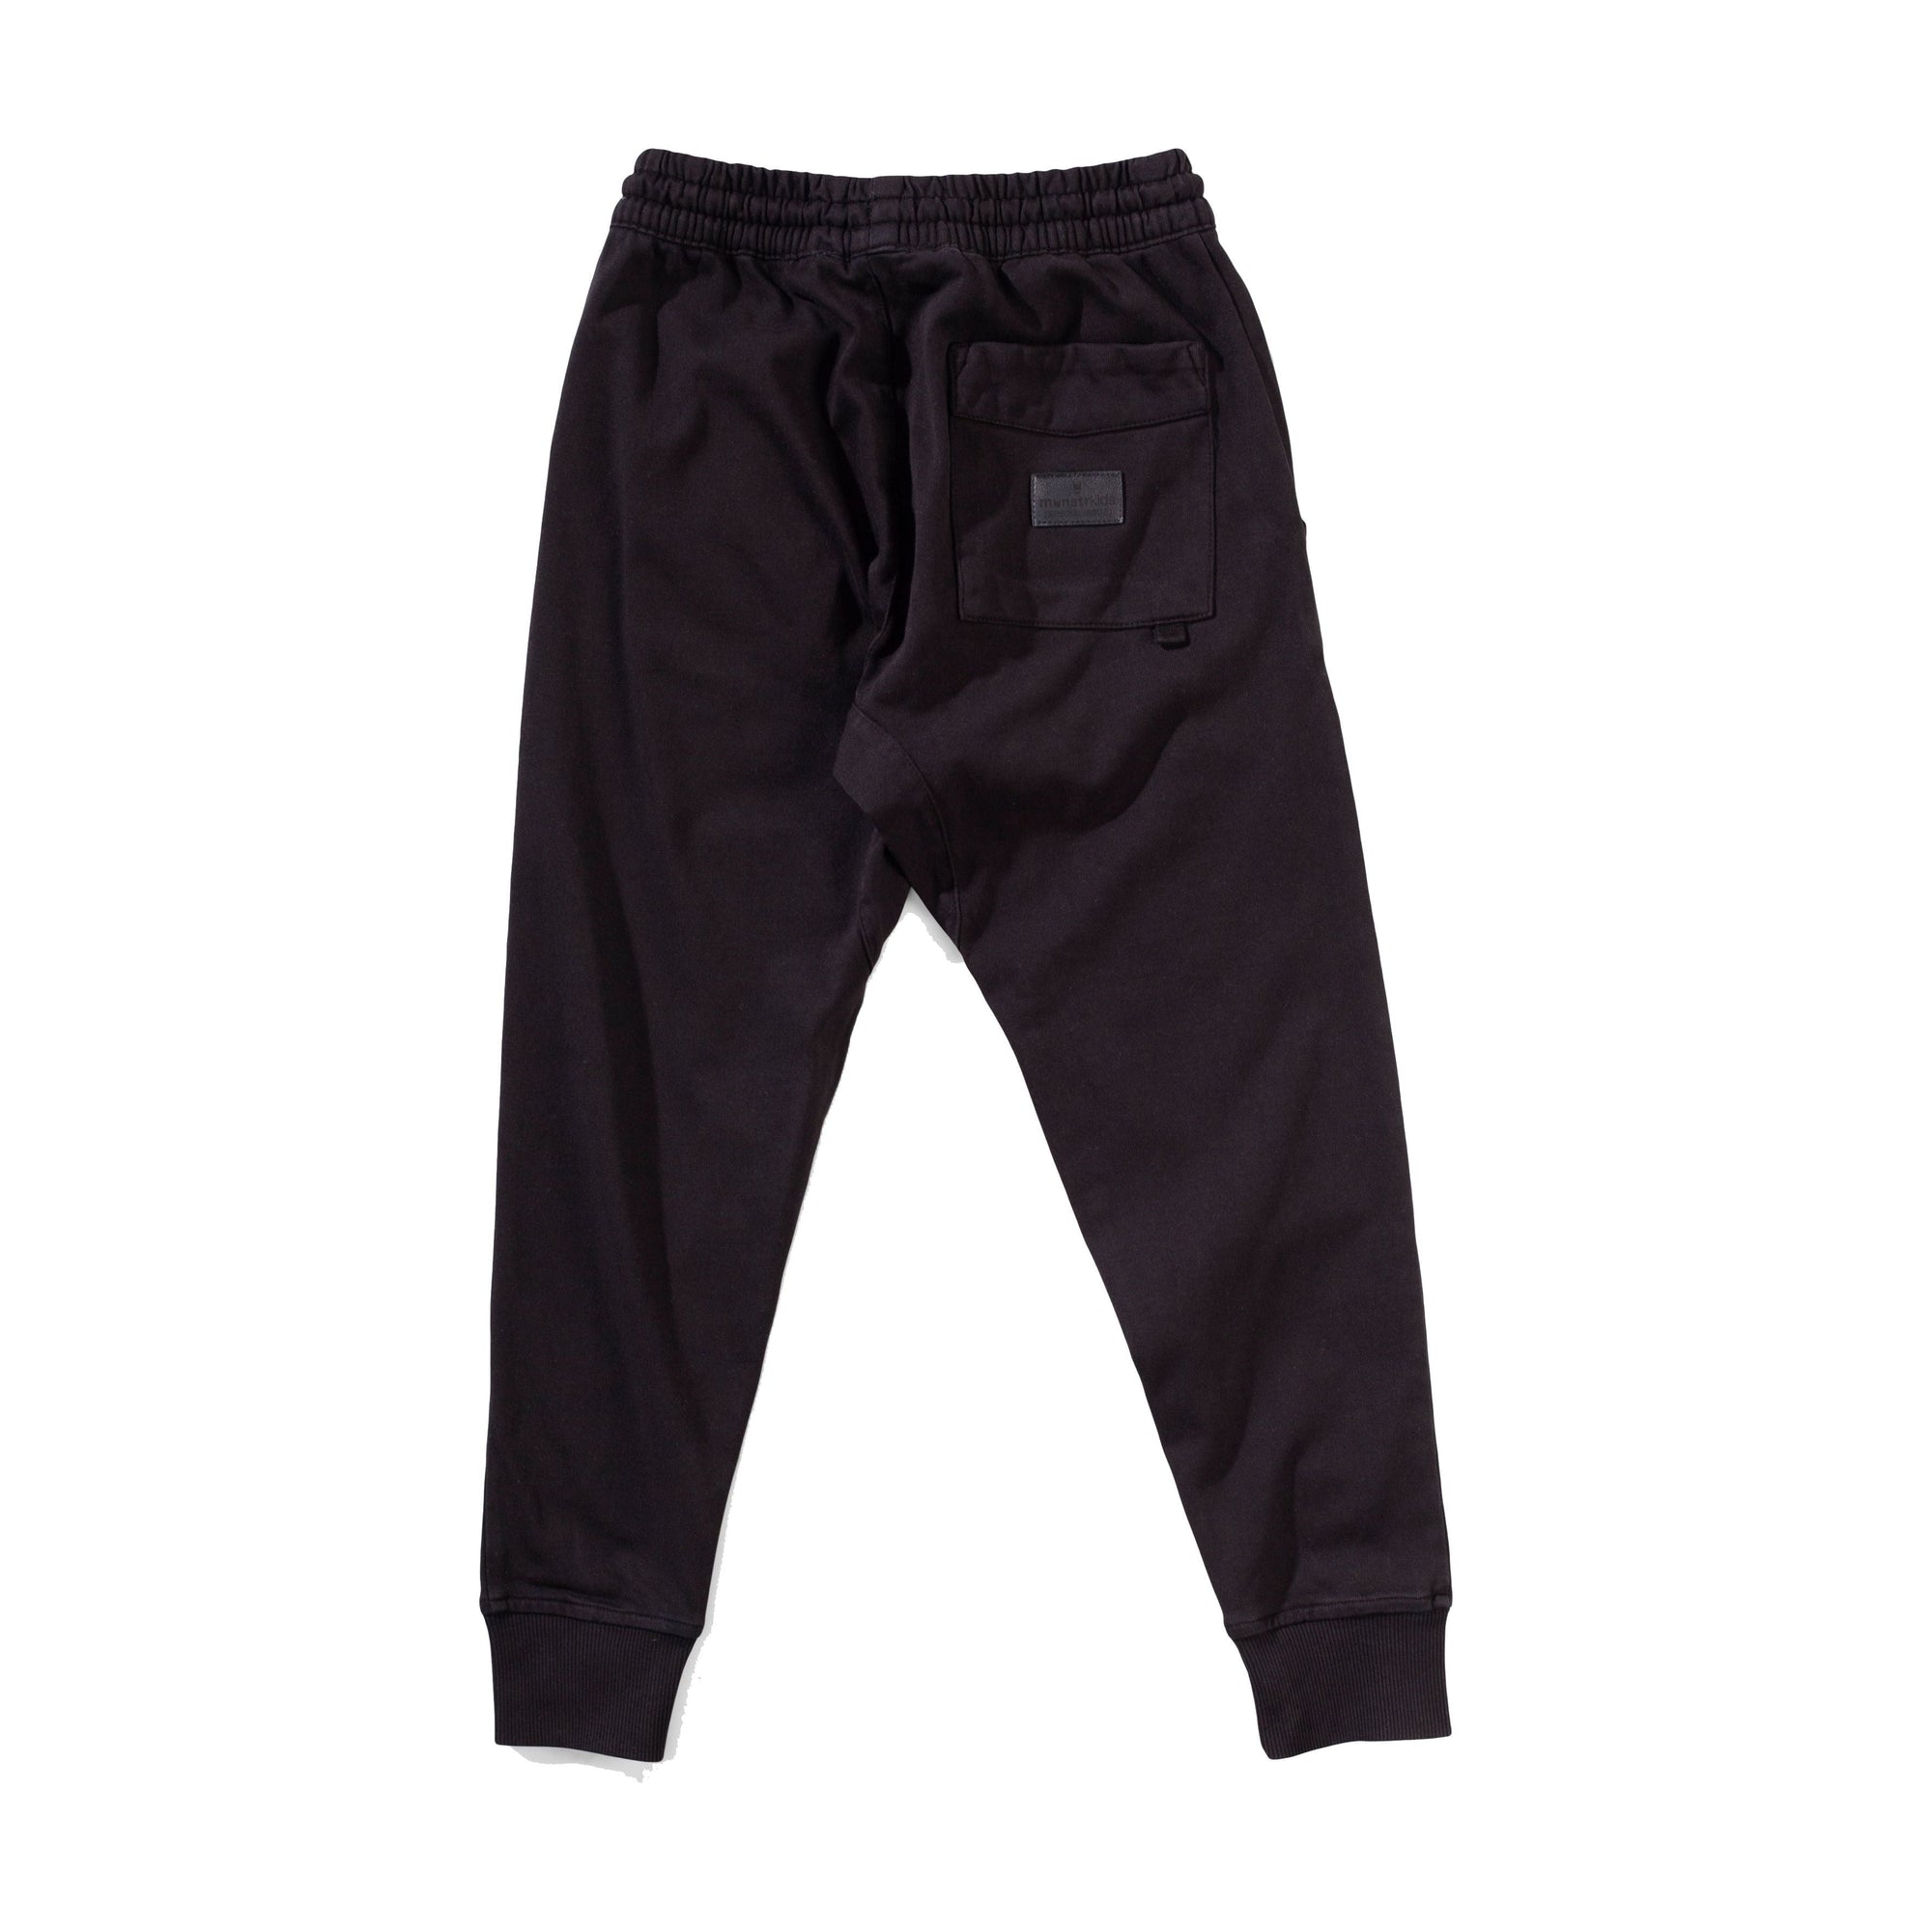 Tracker Rugby Pant - Washed Black